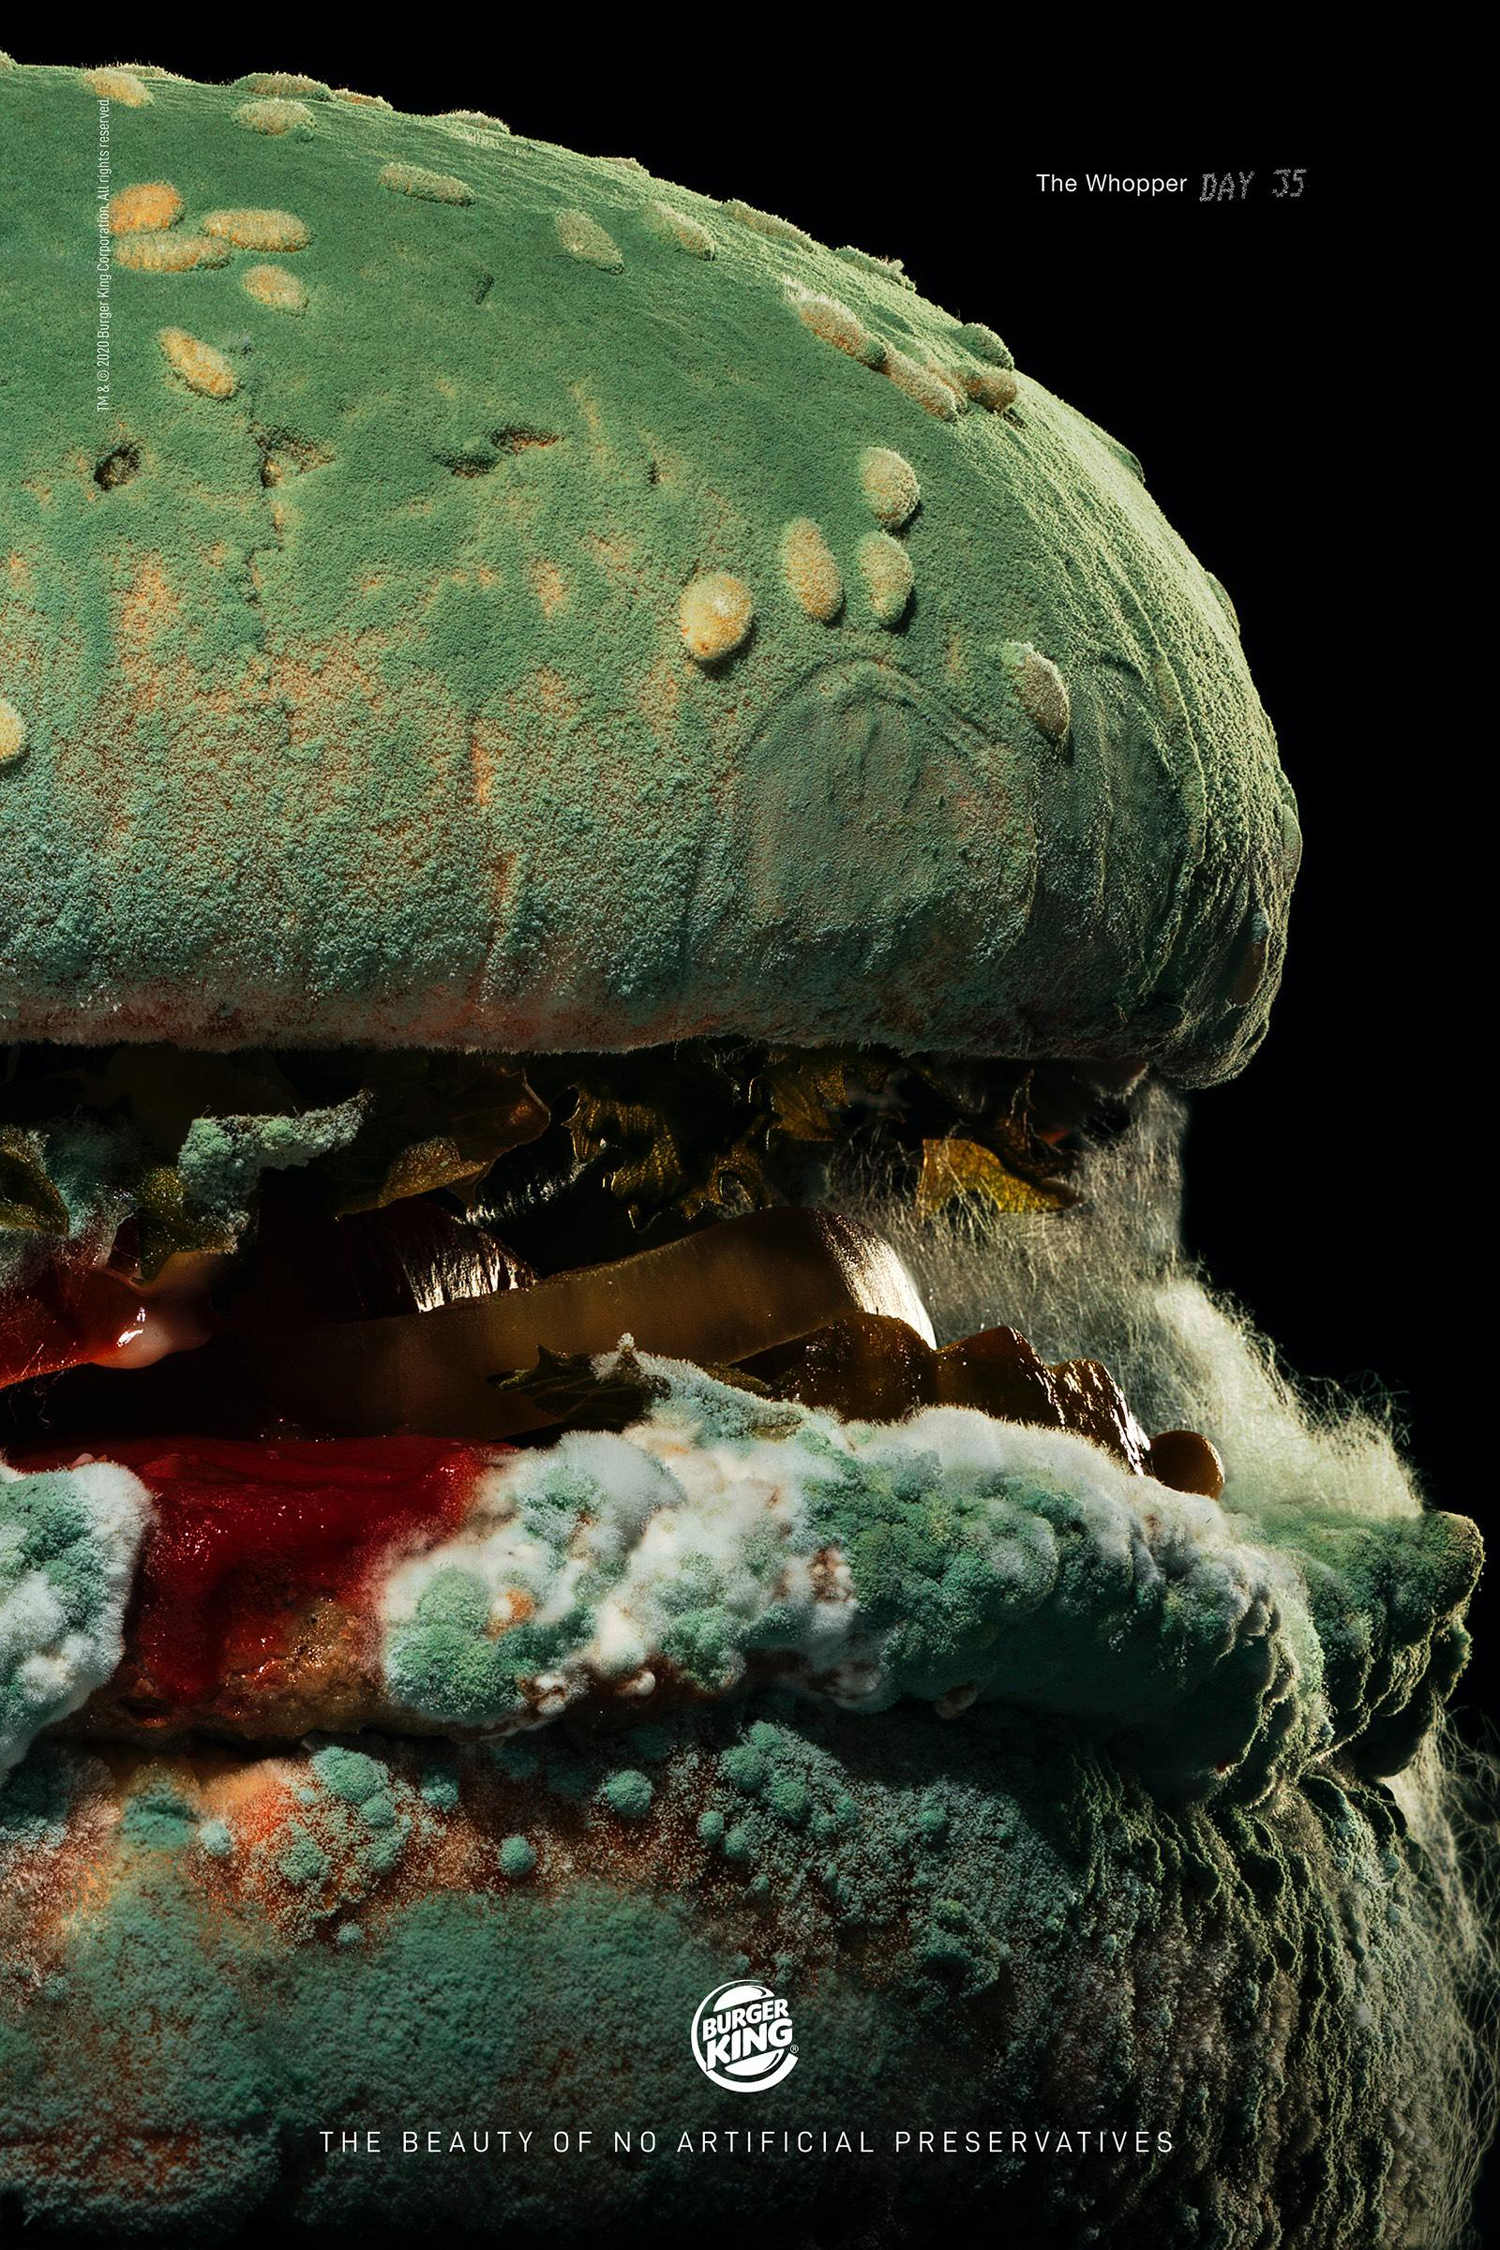 Burger King Unveils New AD Featuring Moldy Whopper